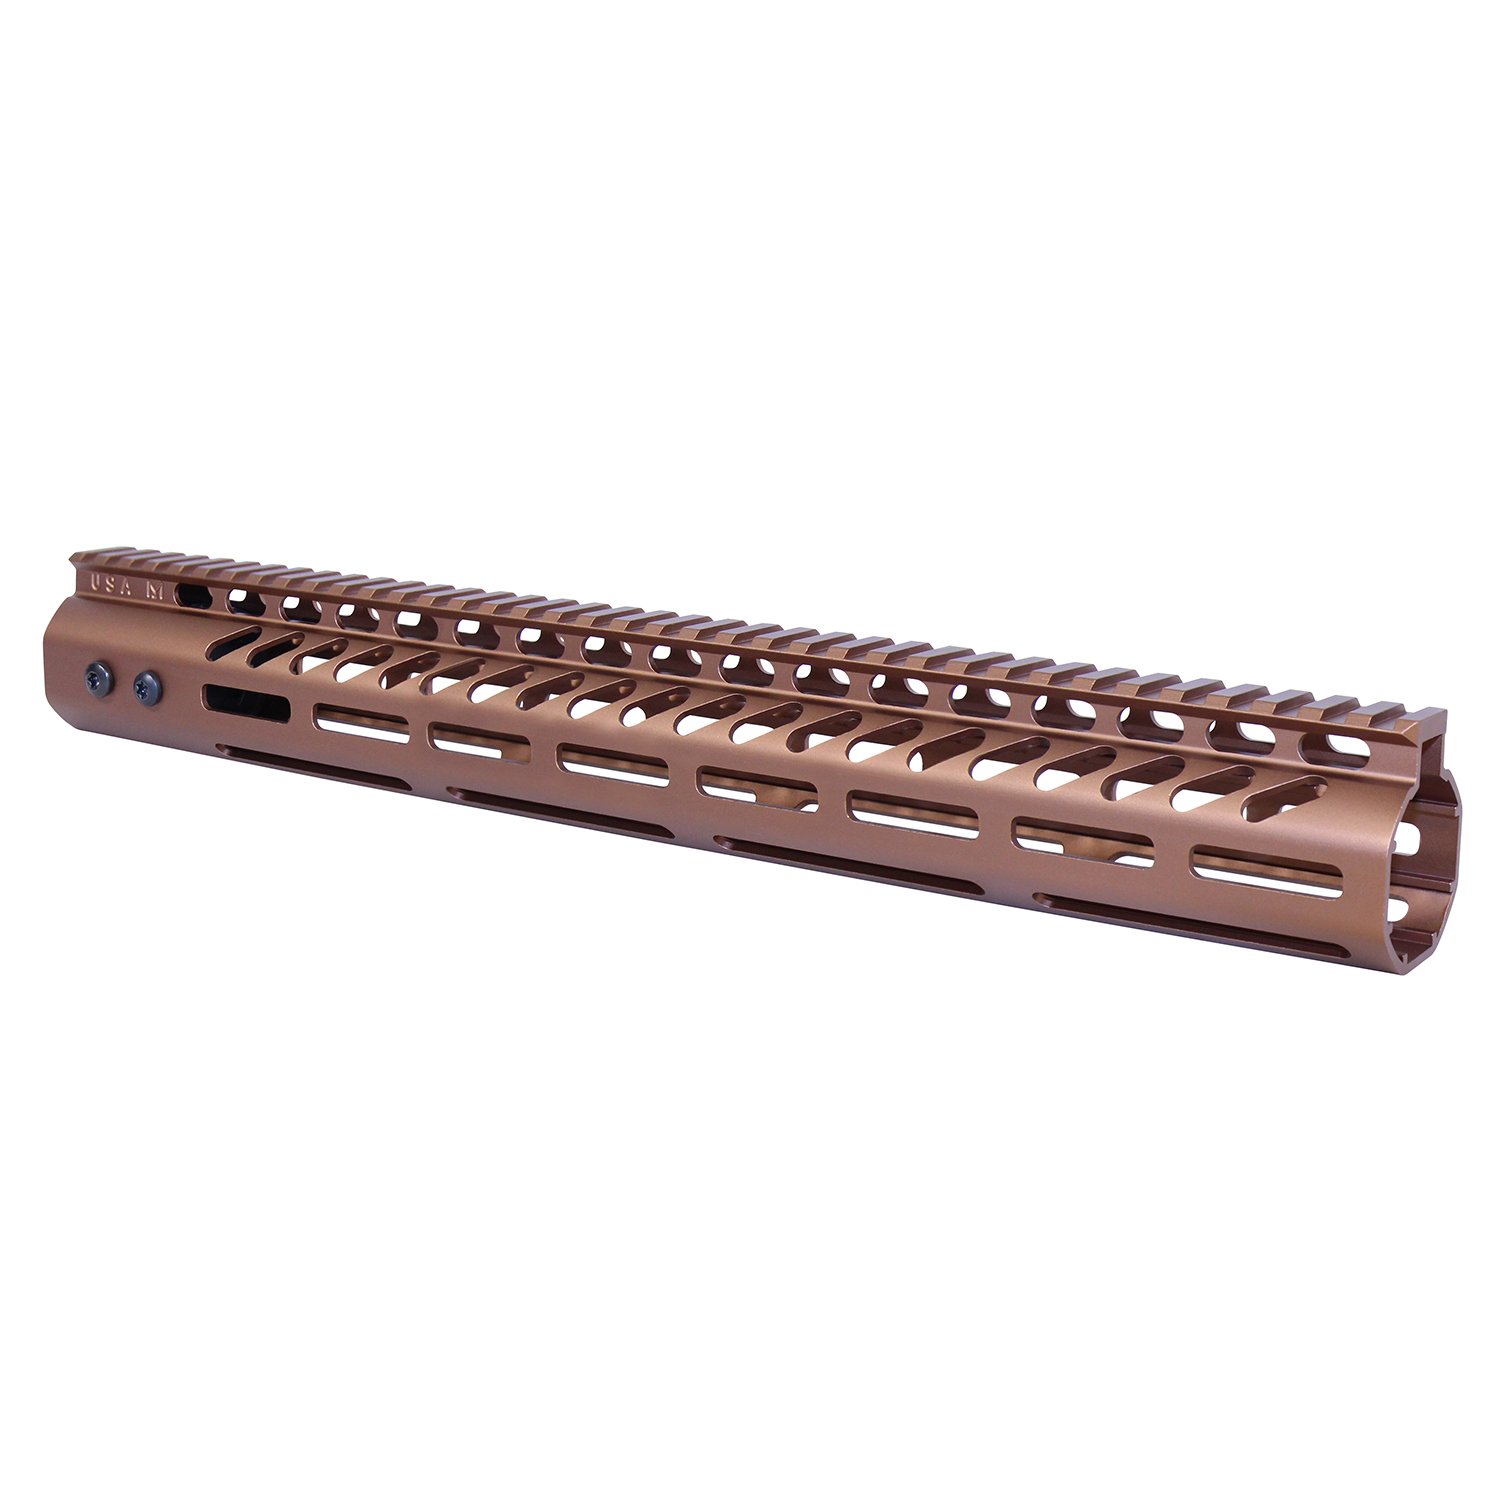 15" Ultra Lightweight Thin M-LOK System Free Floating Handguard With Monolithic Top Rail (.308 Cal) (Anodized Bronze)